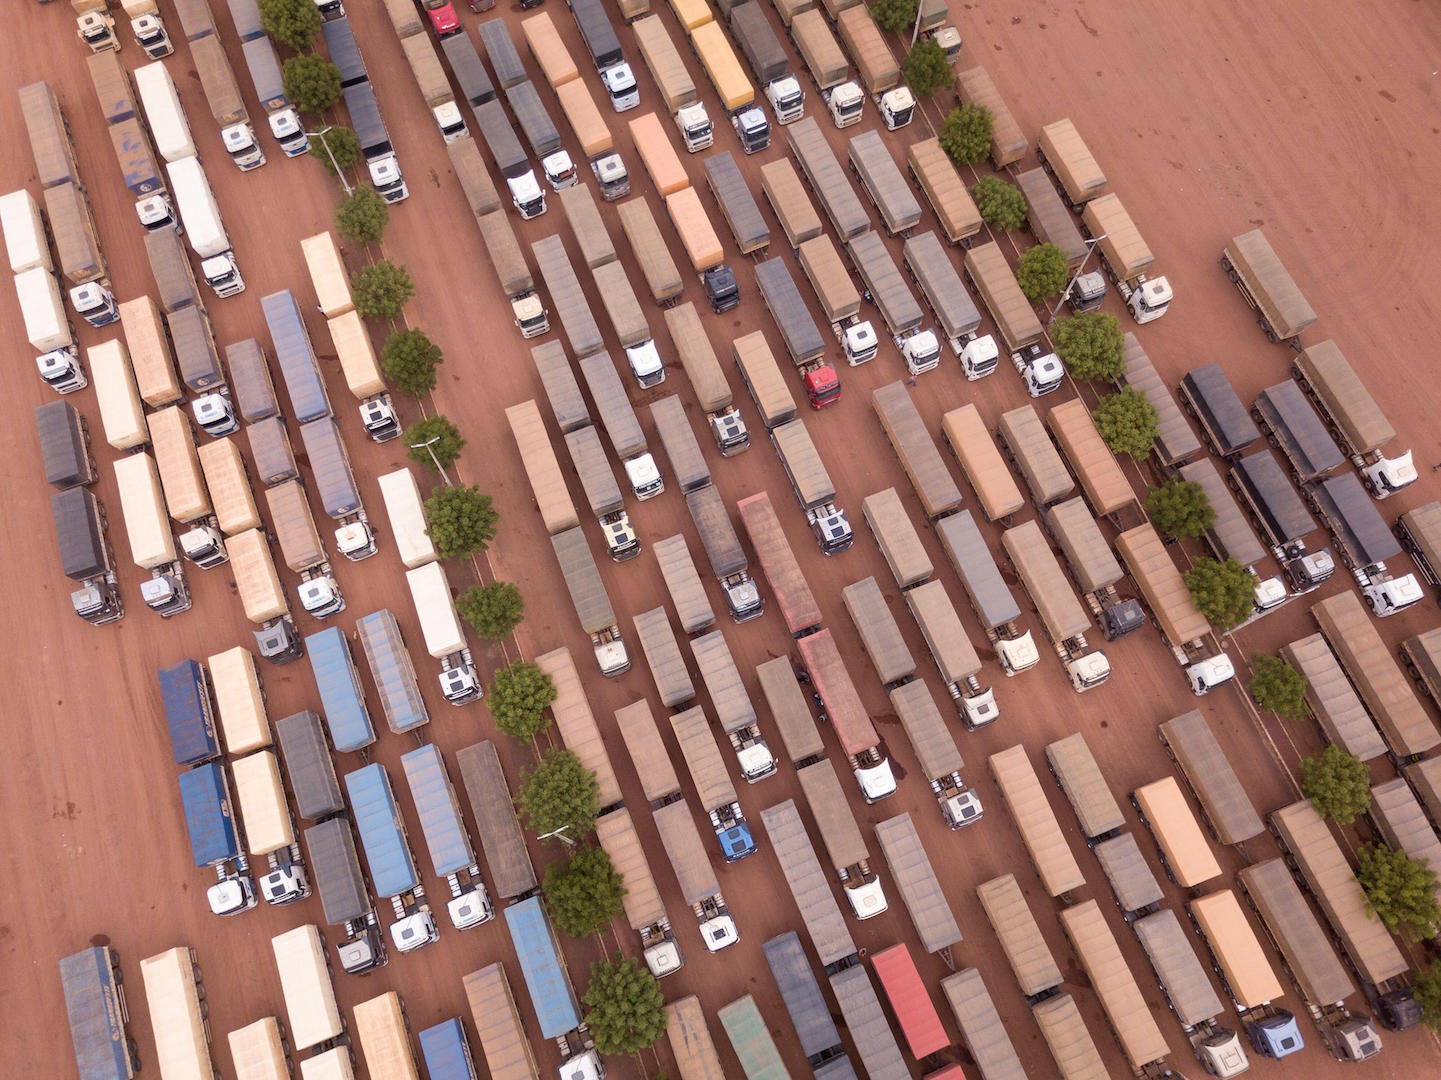 An aerial view of soy trucks 